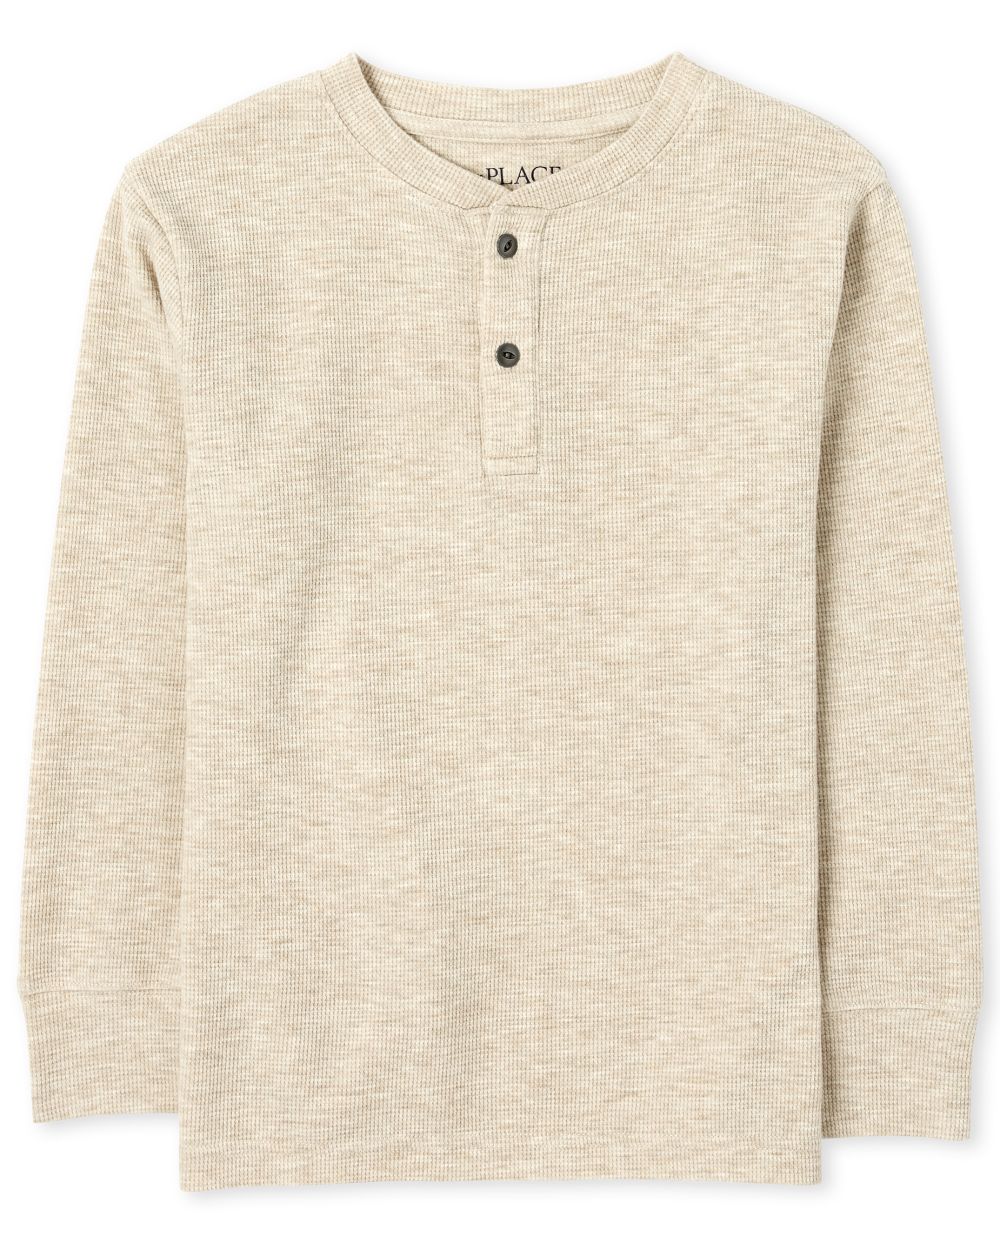 

Boys Boys Thermal Henley Top - Gray - The Children's Place